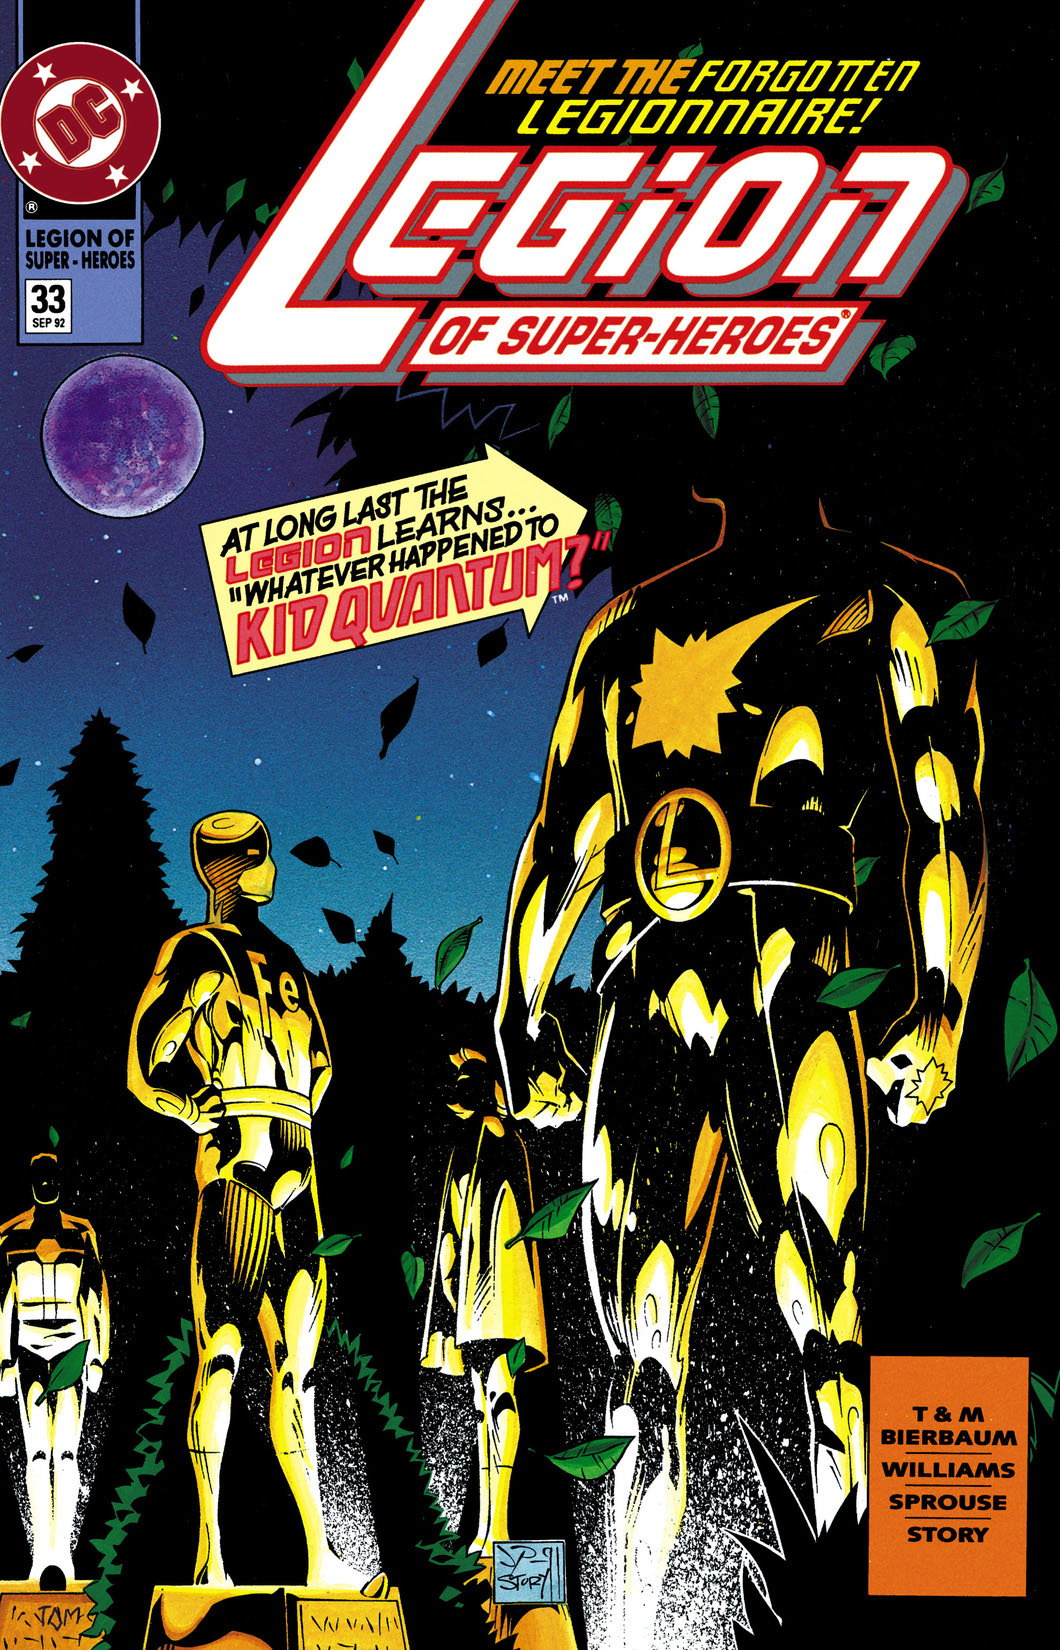 Legion of Super-Heroes (1989-) #33 preview images